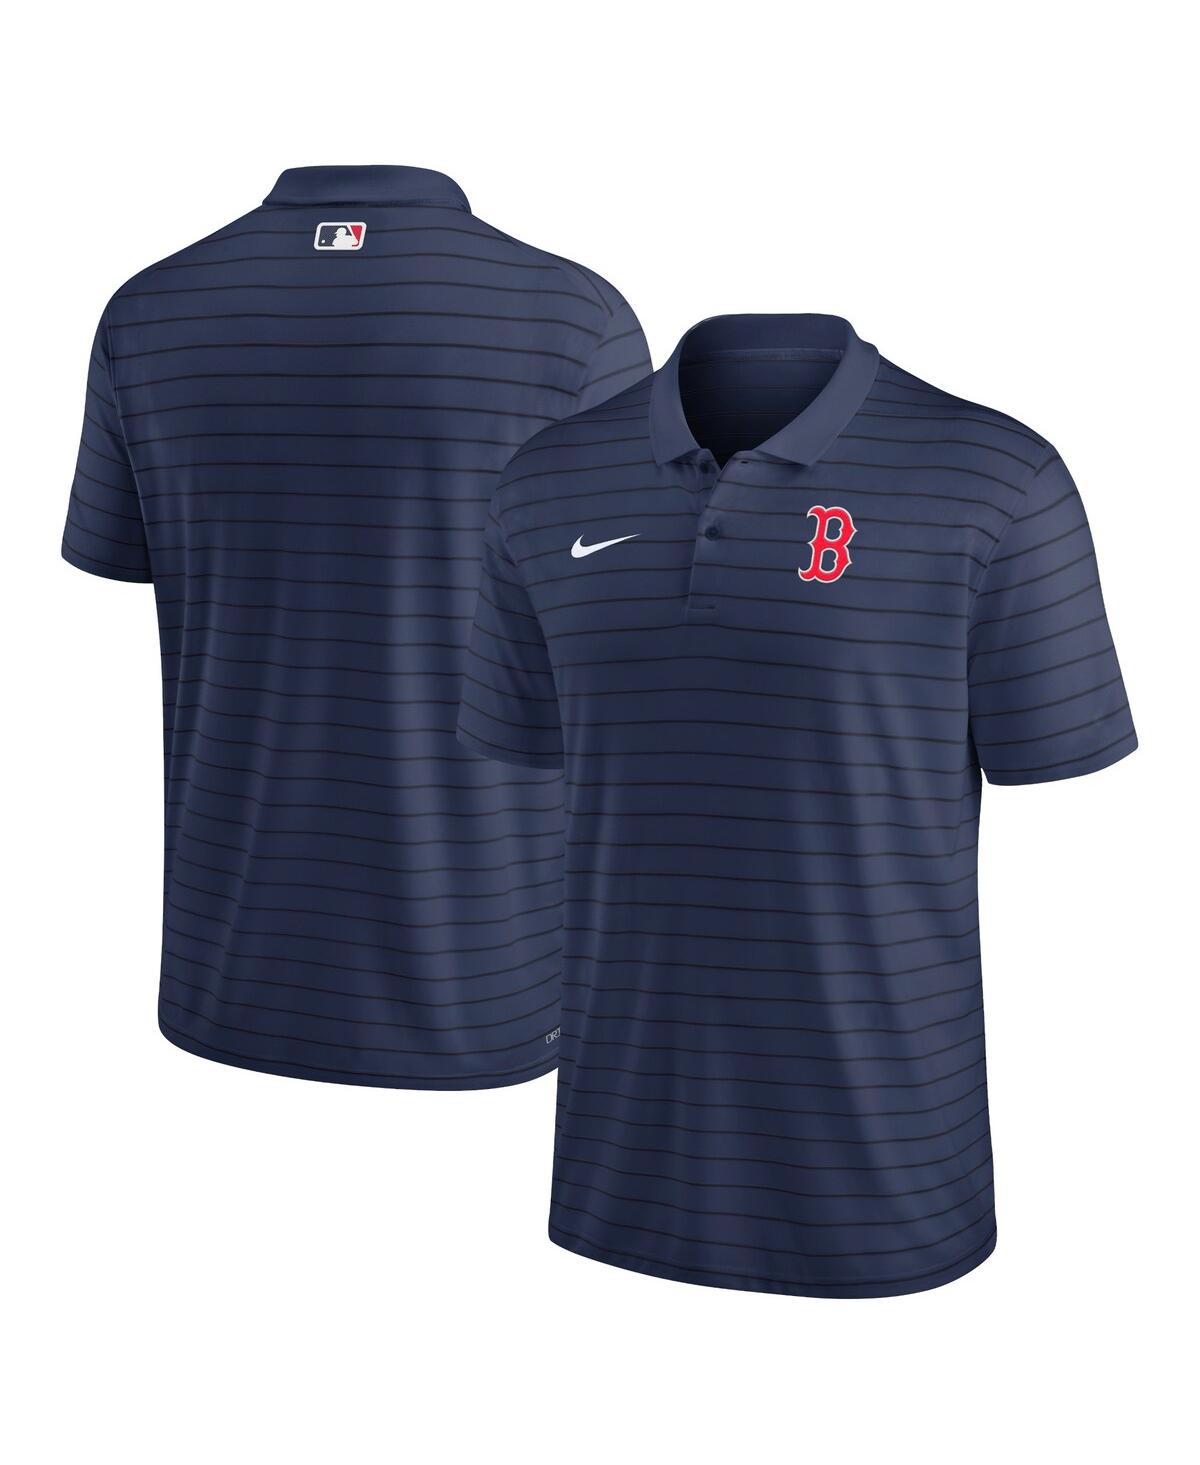 Nike Men's  Navy Boston Red Sox Authentic Collection Victory Striped Performance Polo Shirt